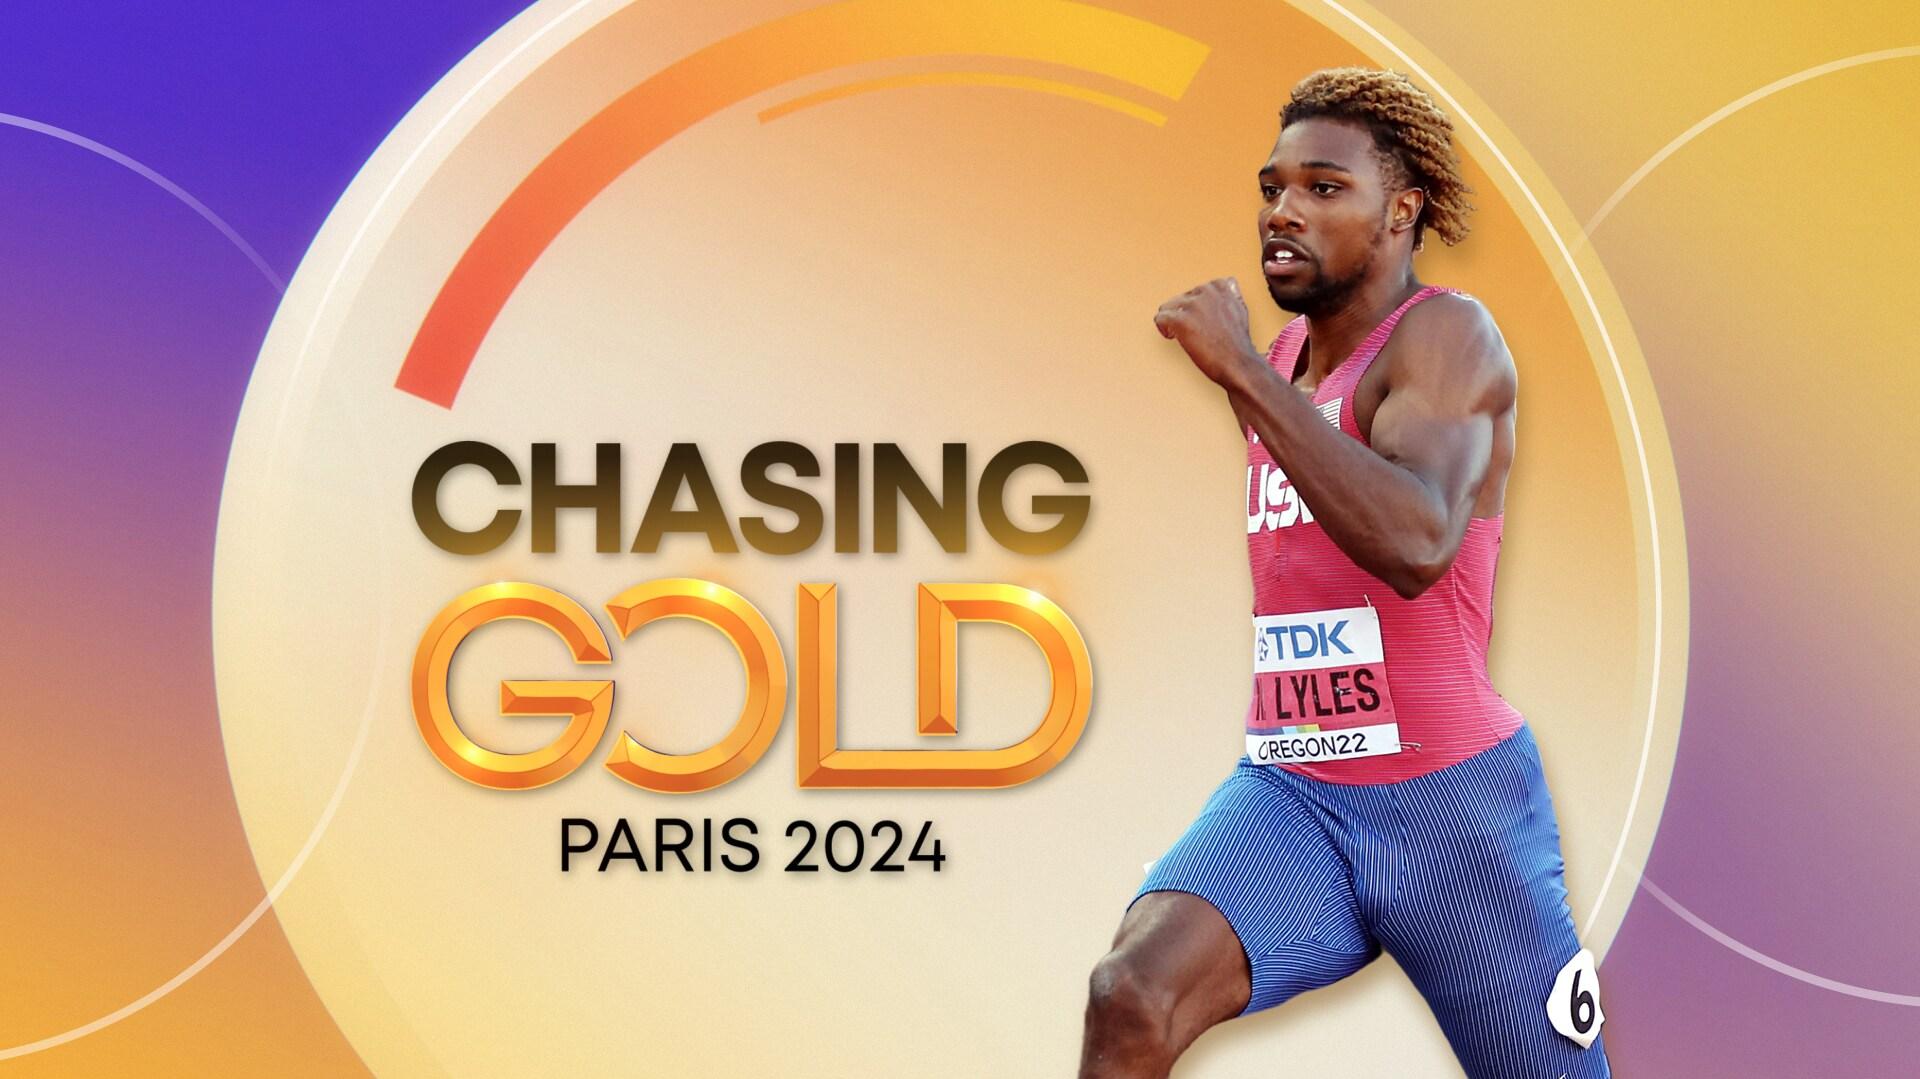 Watch The Episode Of Chasing Gold Paris